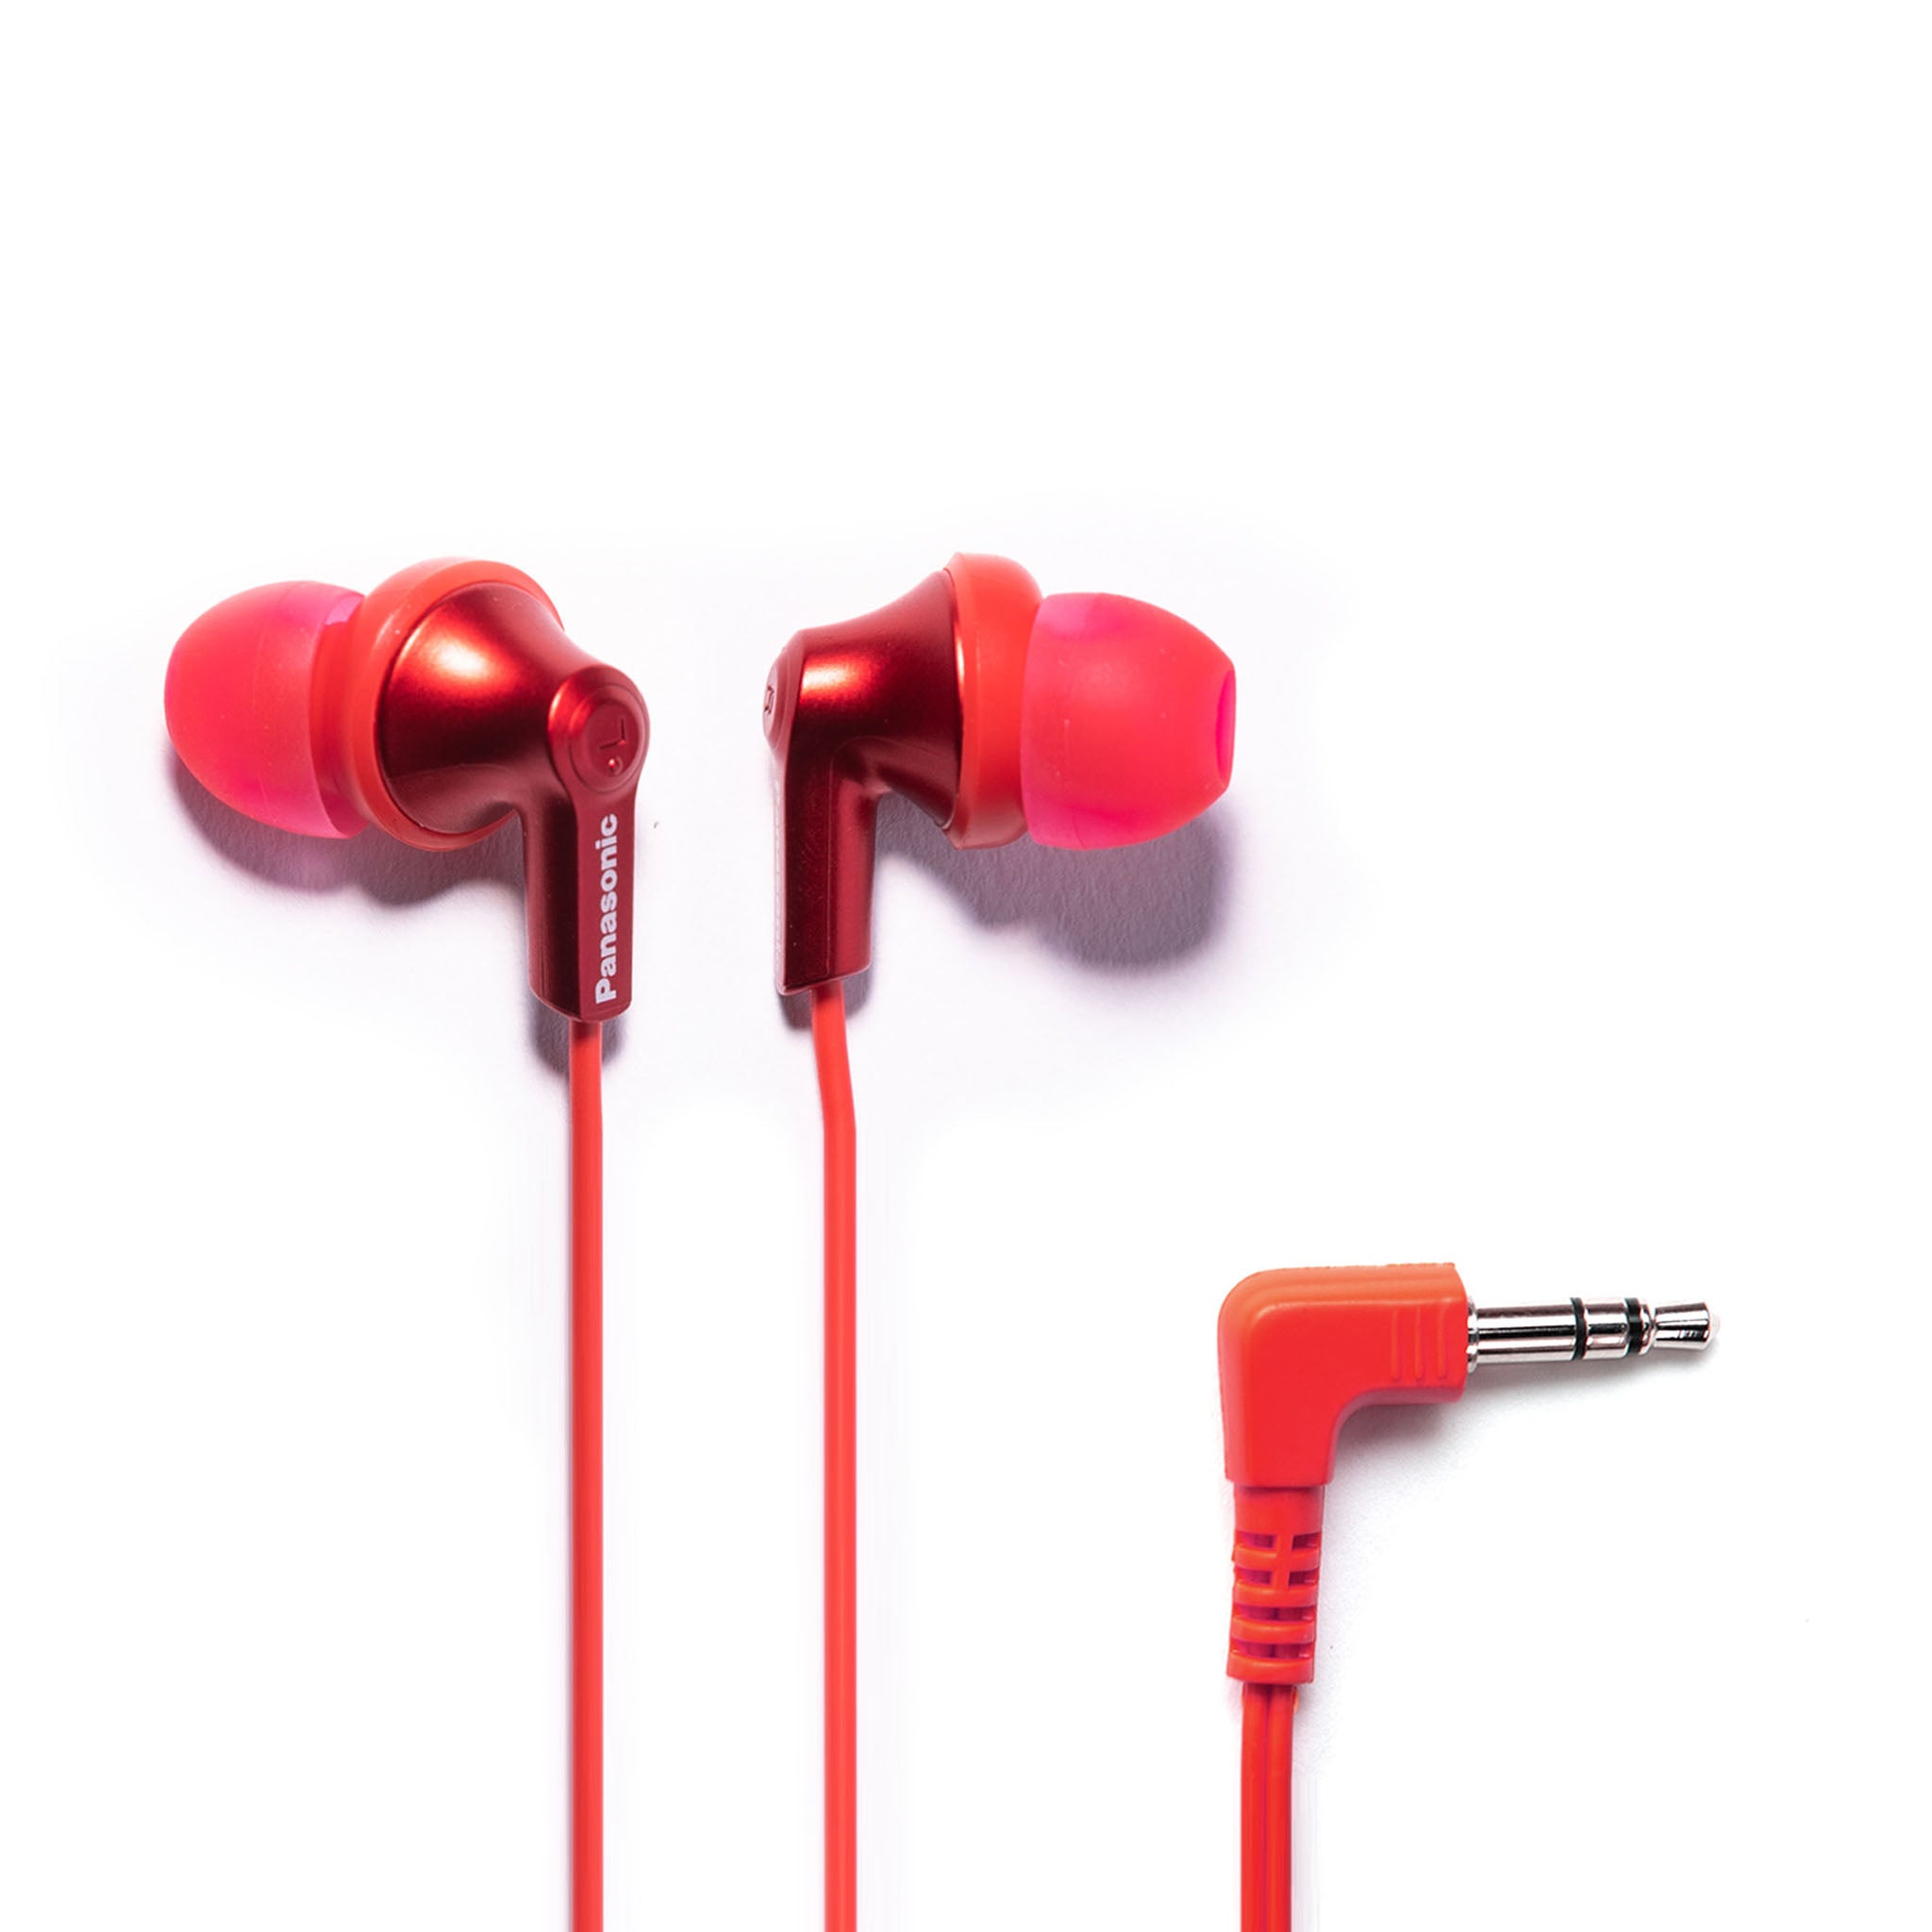 Panasonic ErgoFit In-Ear Laptops RP-HJE120 and with 3.5mm Earbud Phones - Headphones for Jack